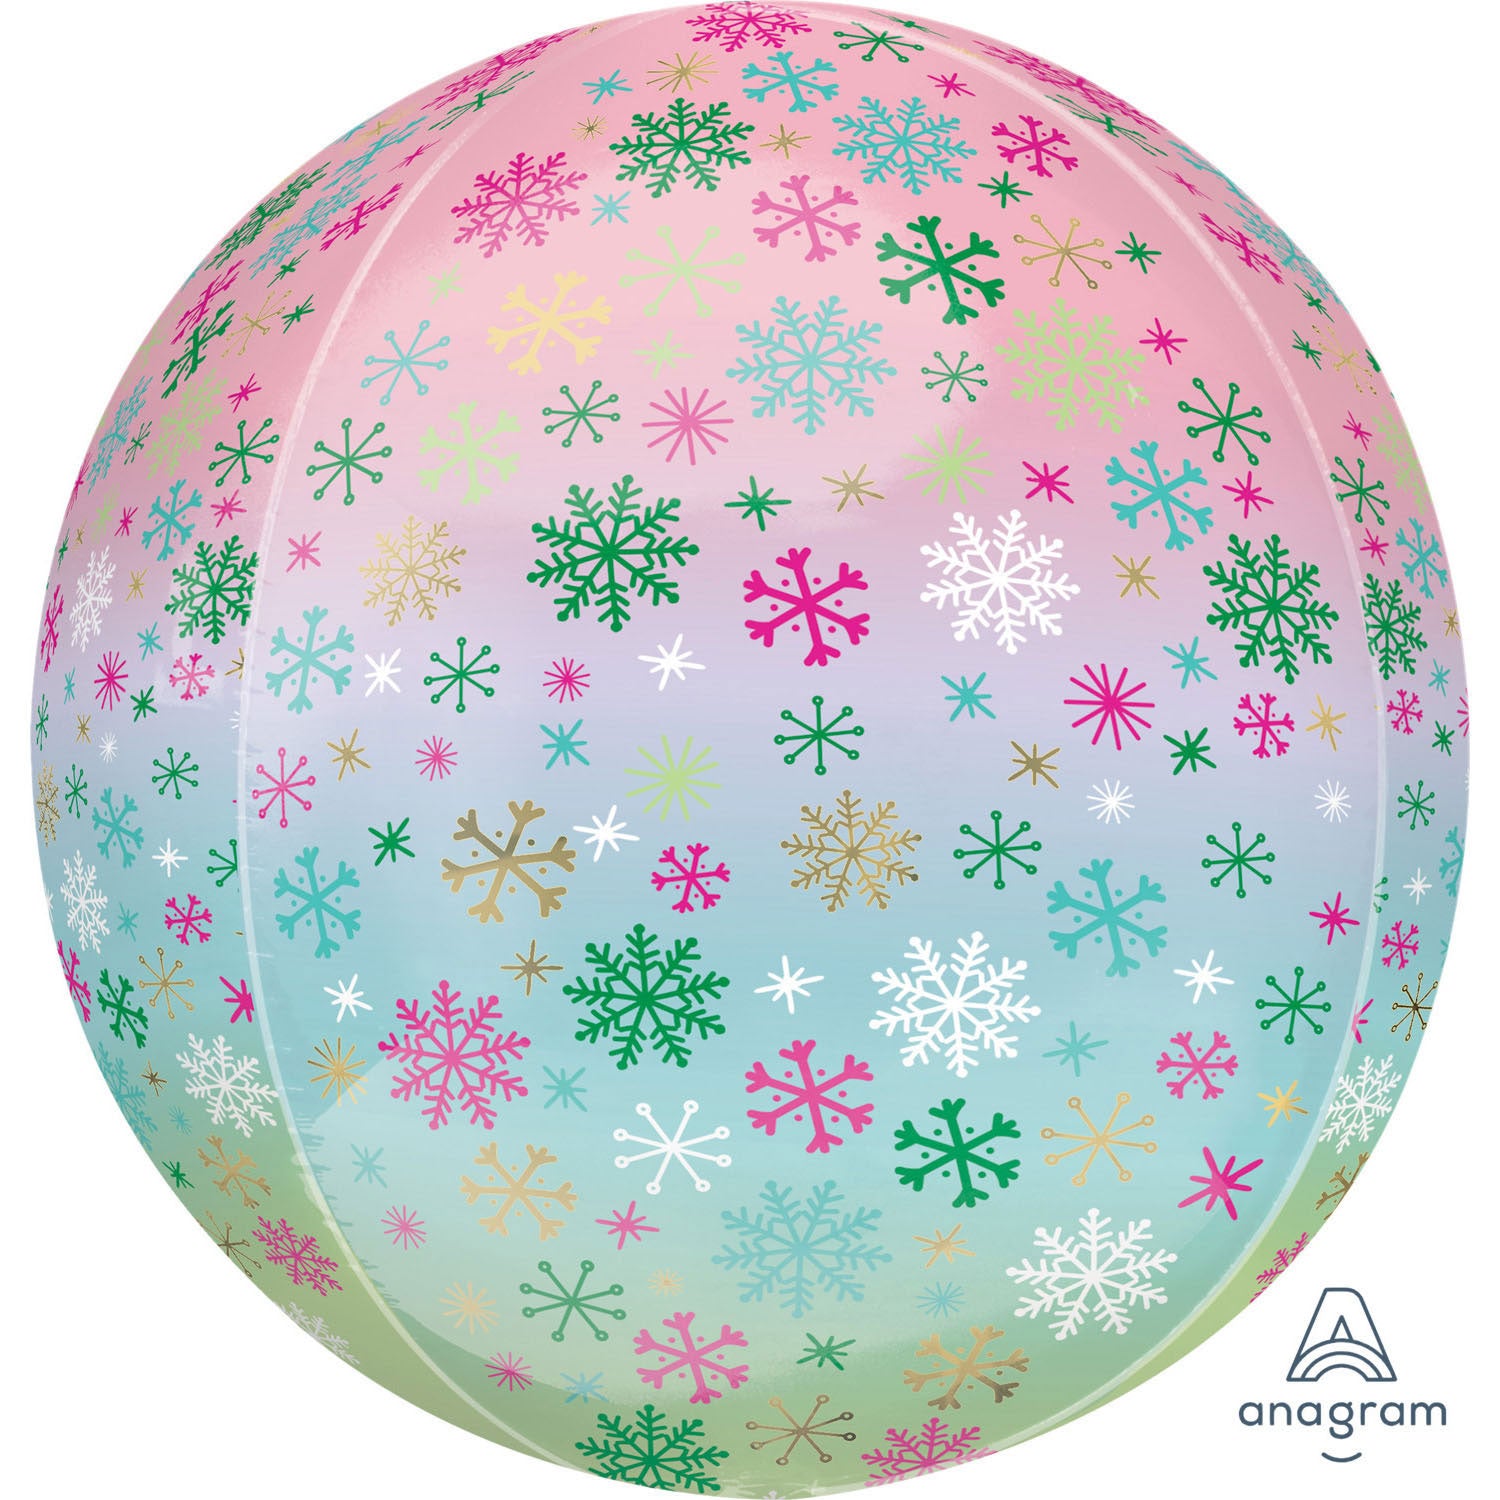 Spherical balloon with snowflakes ombre